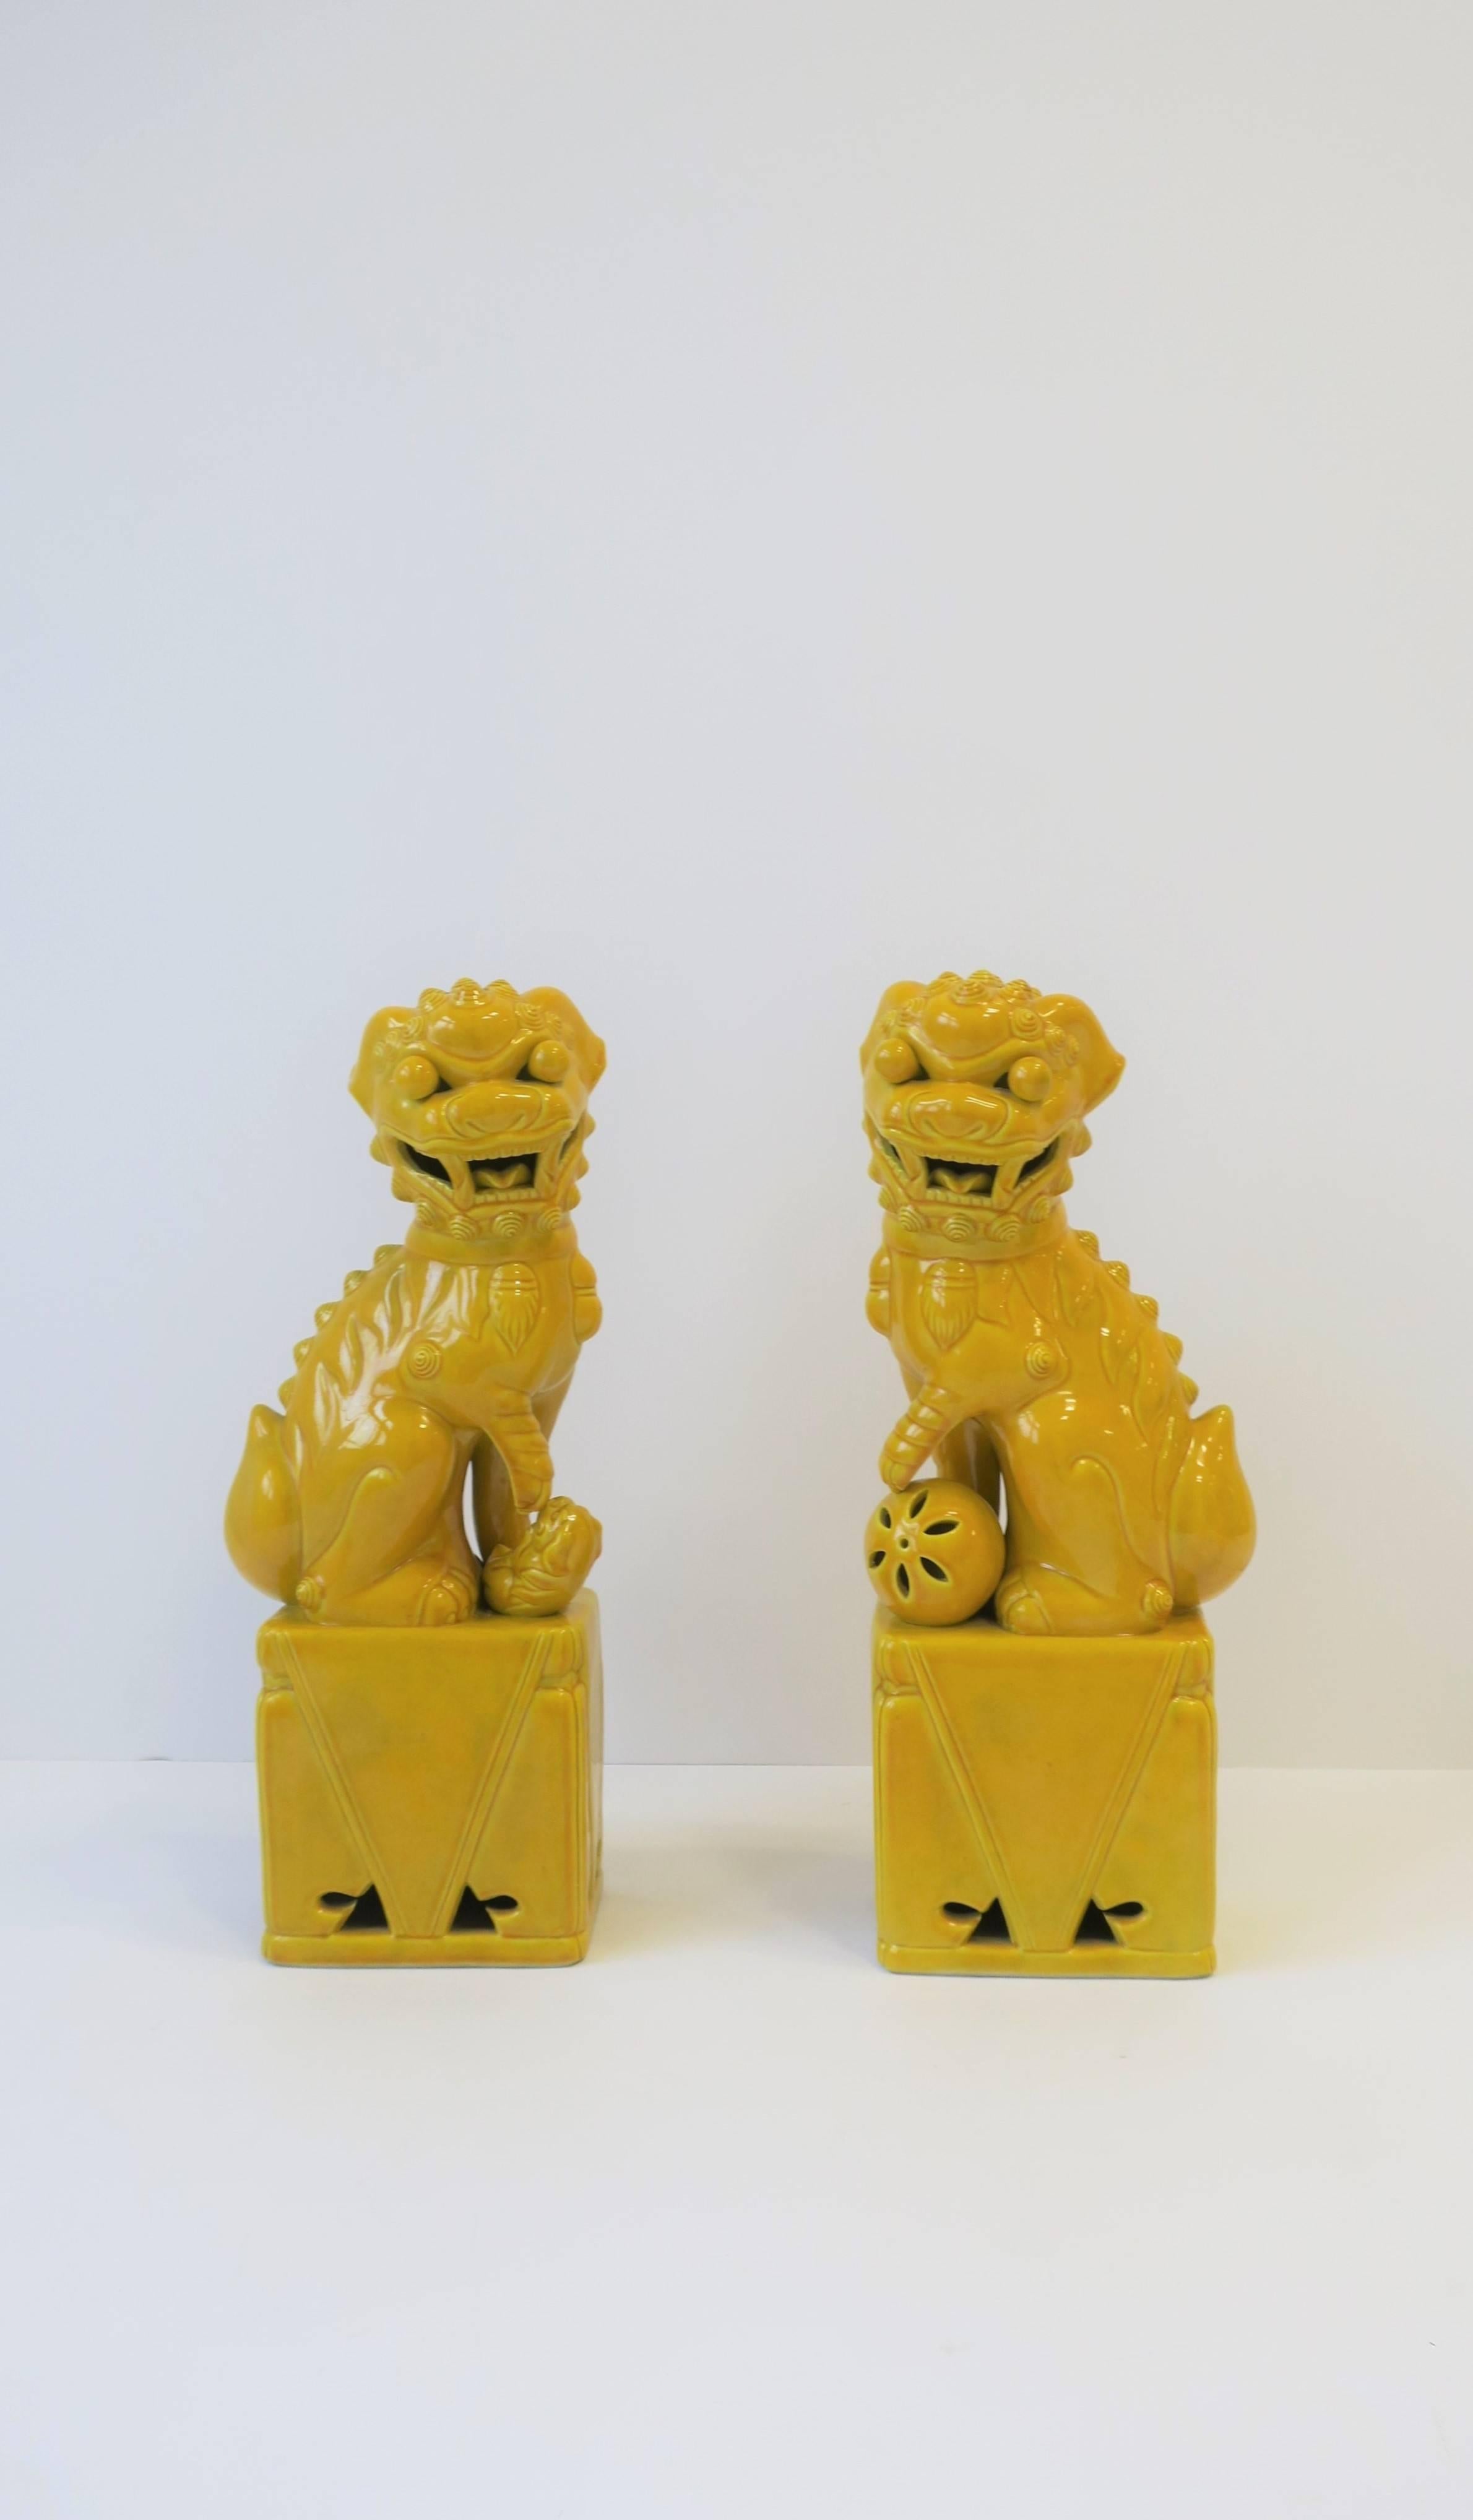 A beautiful pair of relatively tall Midcentury yellow ceramic foo dog or lion sculpture decorative objects or bookends, circa mid-20th century, Japan. Sold as a set/pair. Excellent condition. 

Each measure: 14